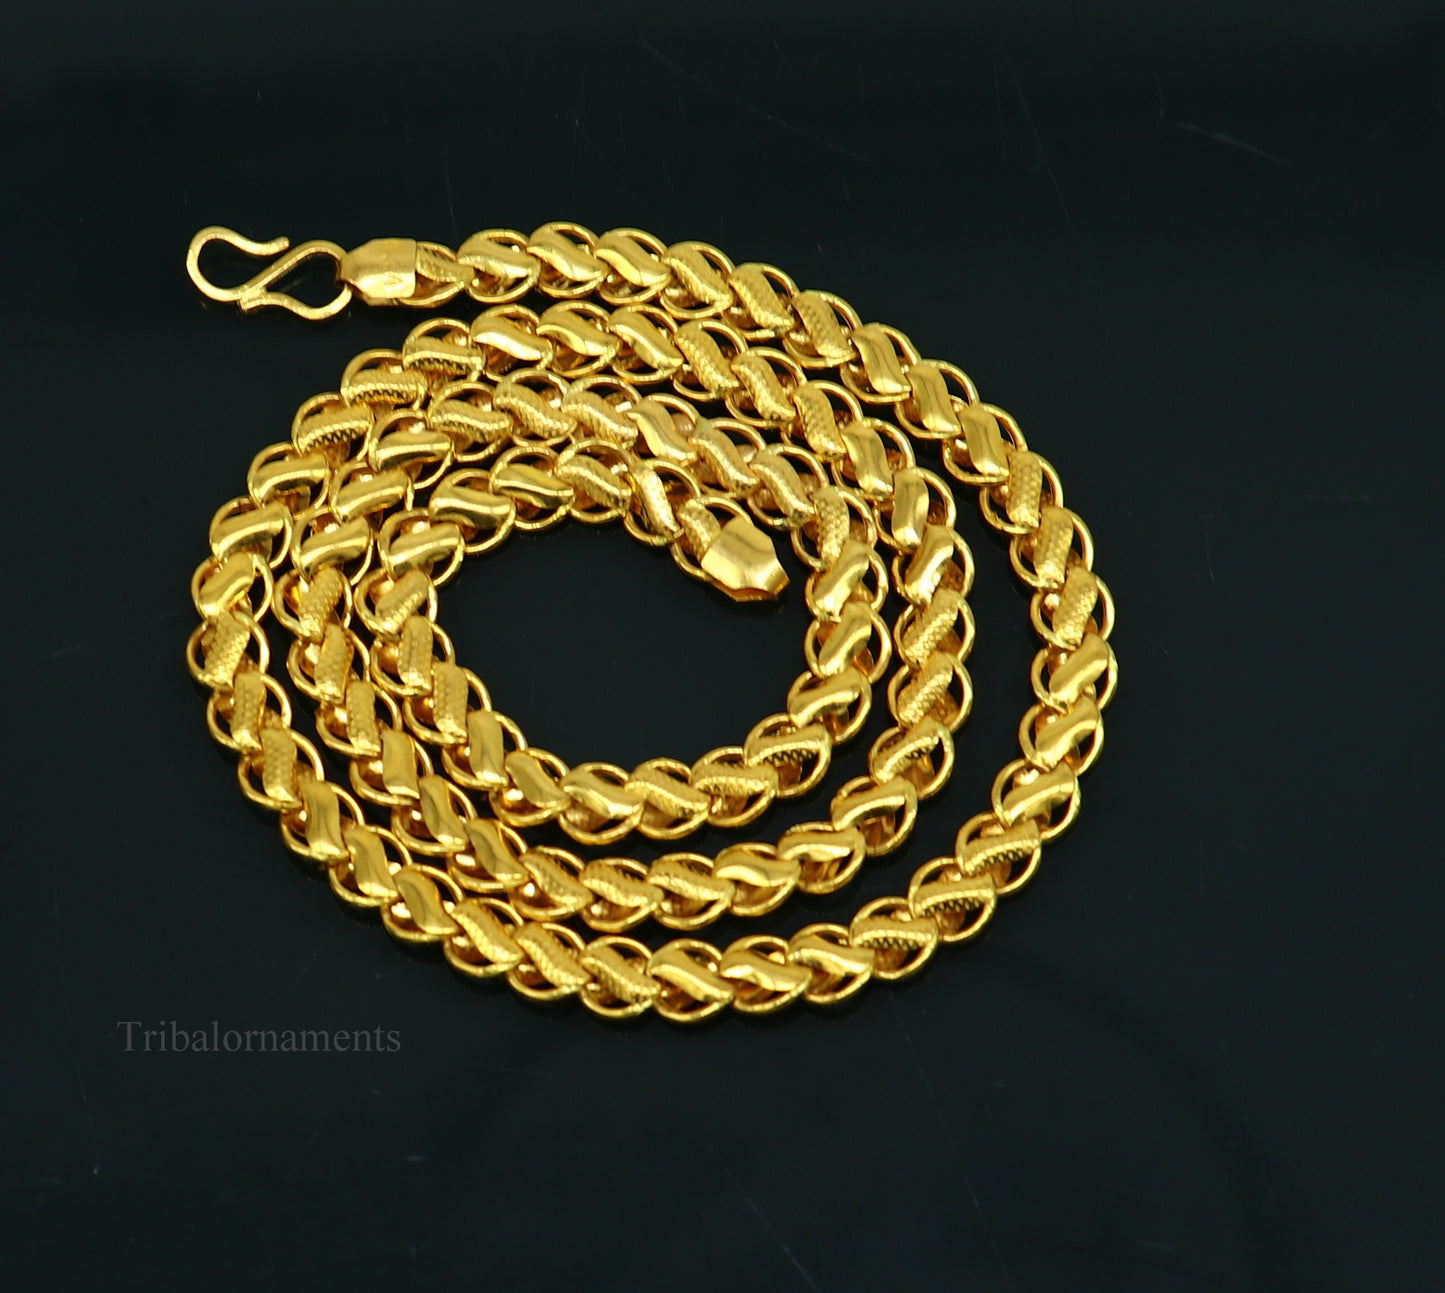 22kt yellow gold handmade customized design stylish royal king lotus chain necklace, best gifting unisex chain, hallmarked chain ch505 - TRIBAL ORNAMENTS